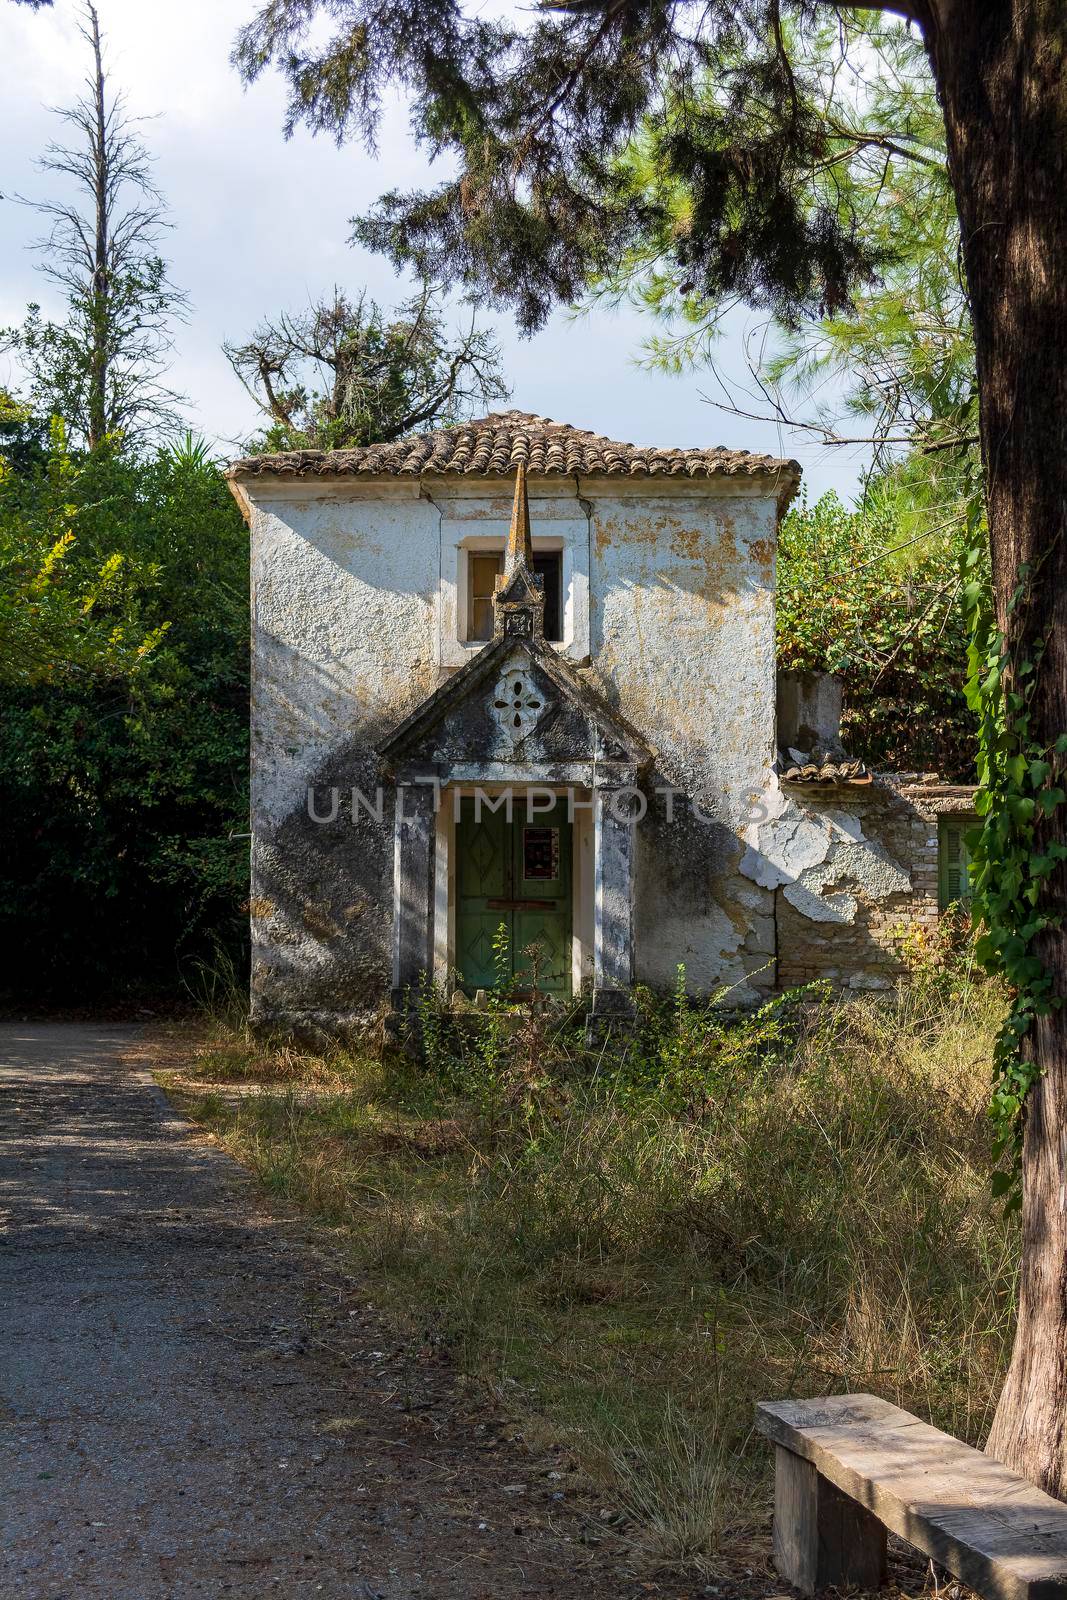 Corfu, Greece - August 26, 2018: Old building in Mon Repos Palace. The villa was built as a summer residence for the British Lord High Commissioner.